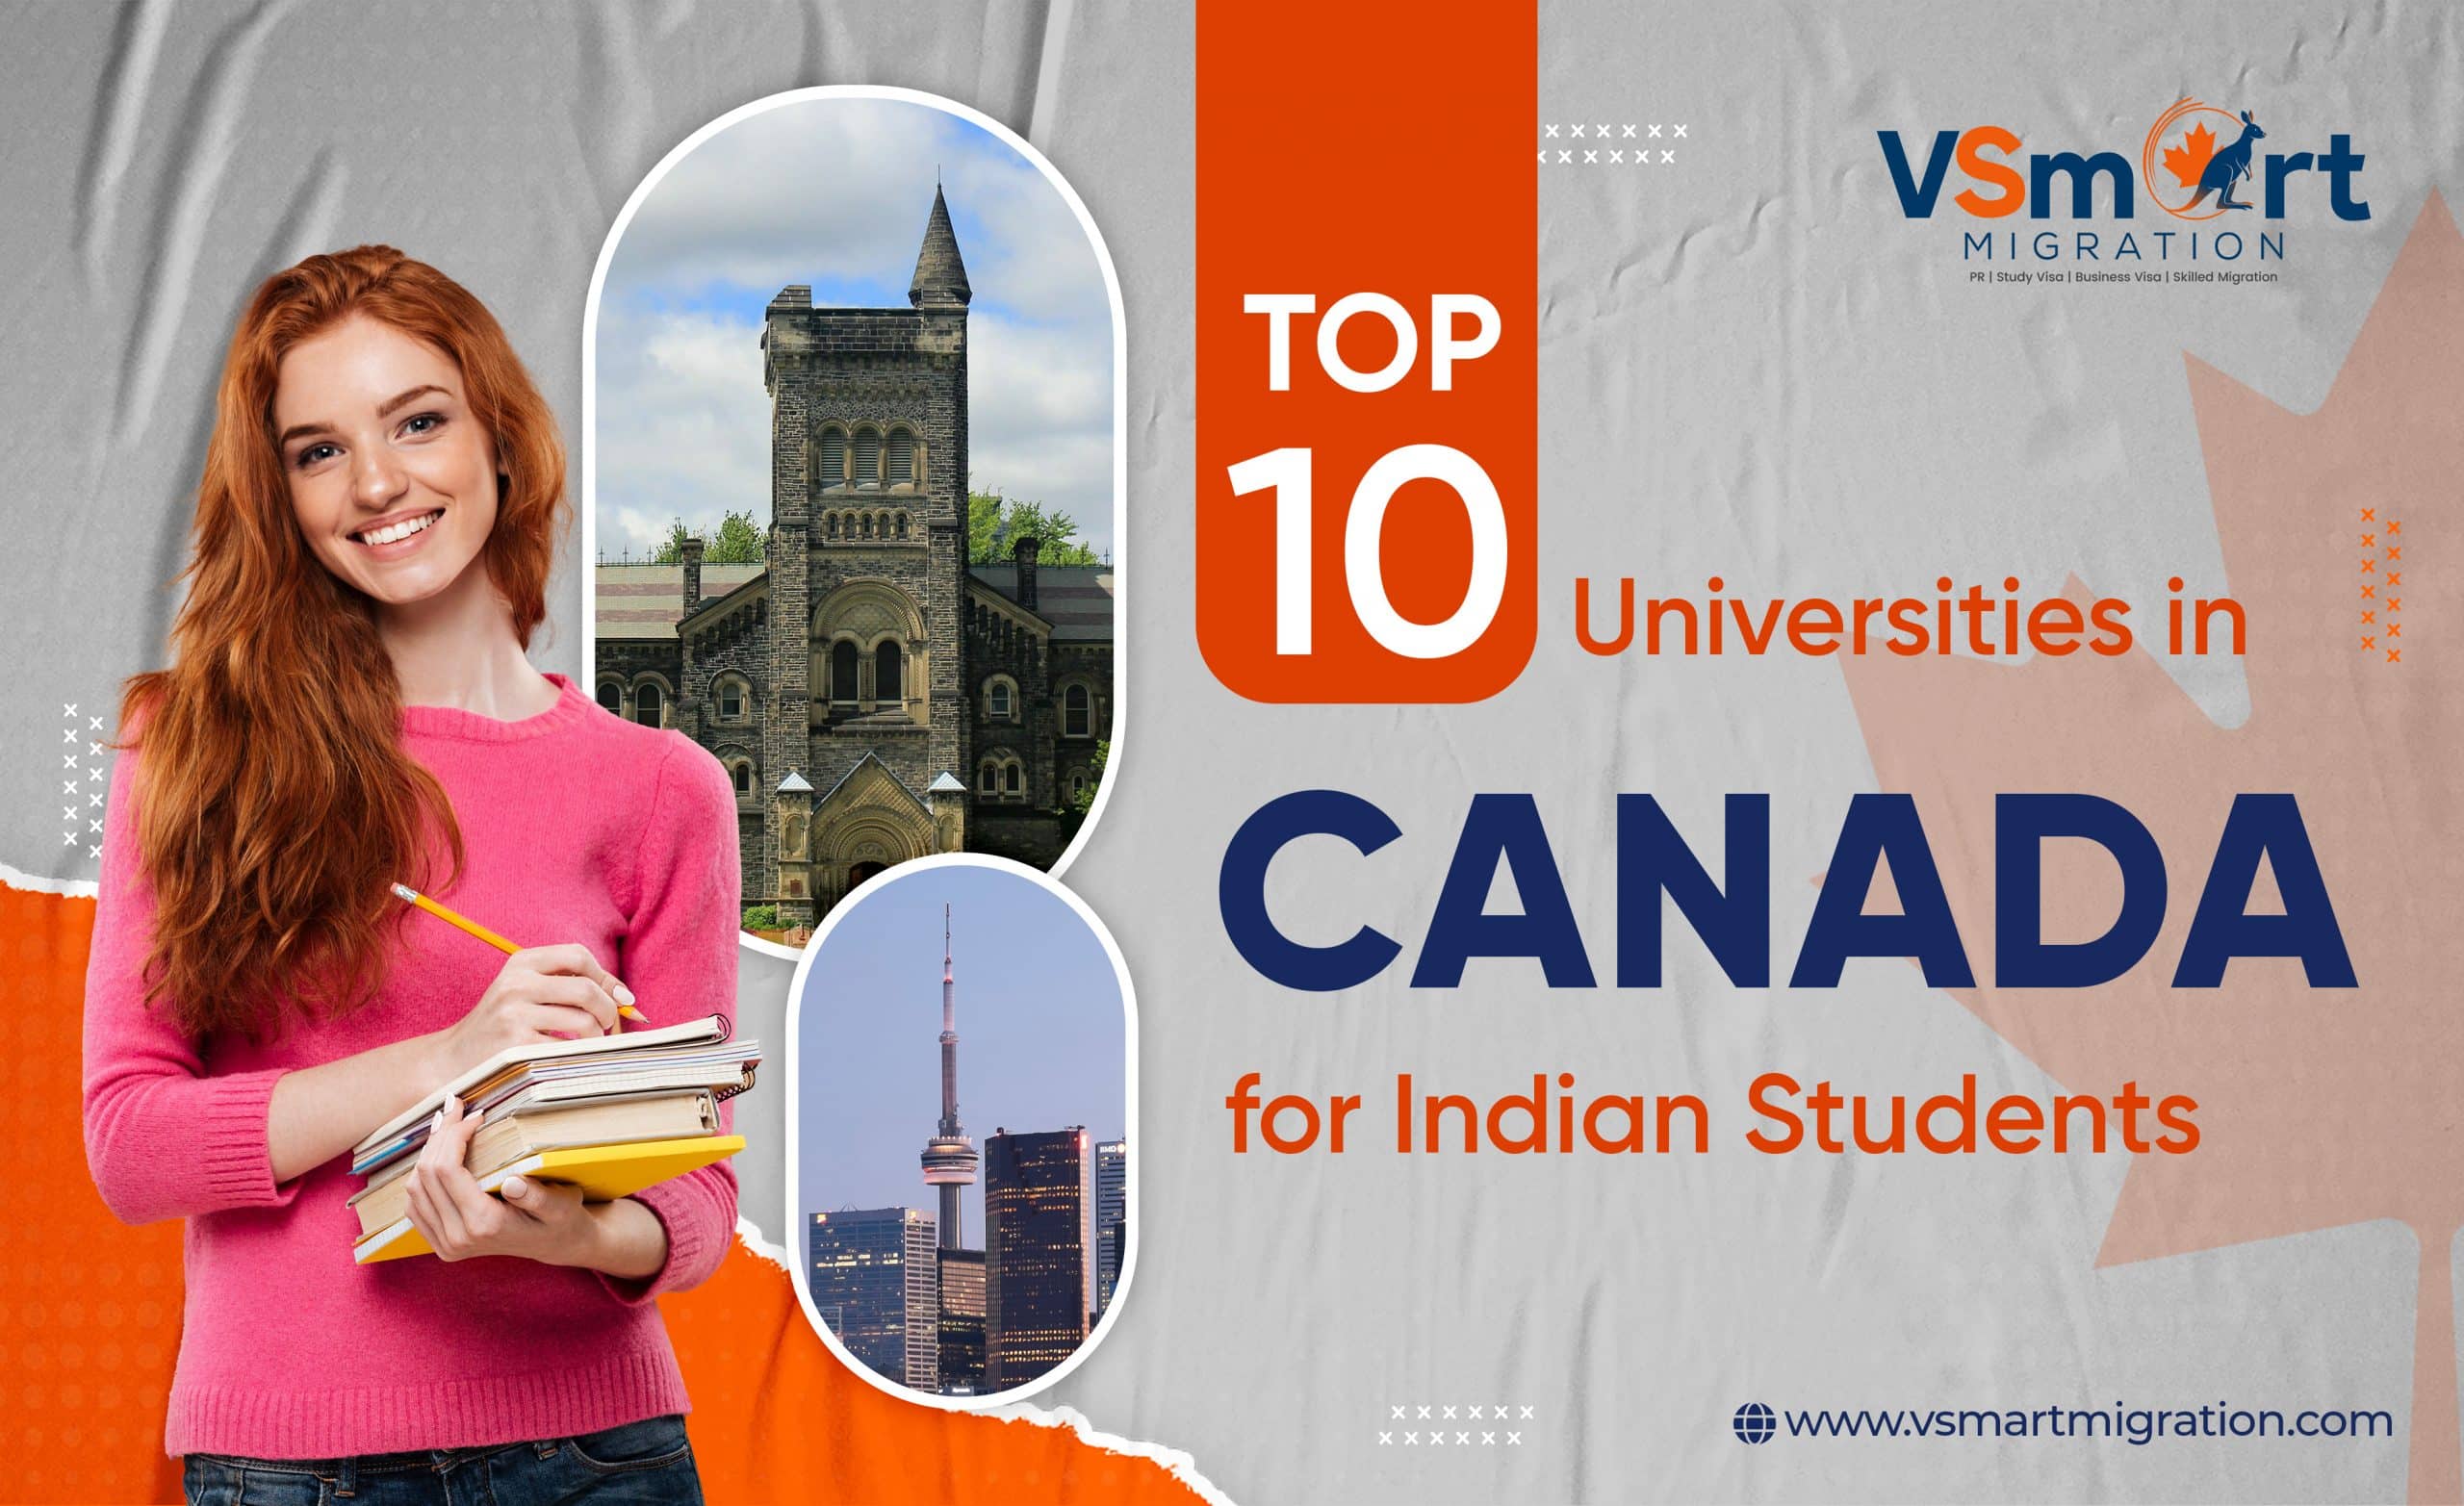 Top 10 Universities in Canada for Indian Students